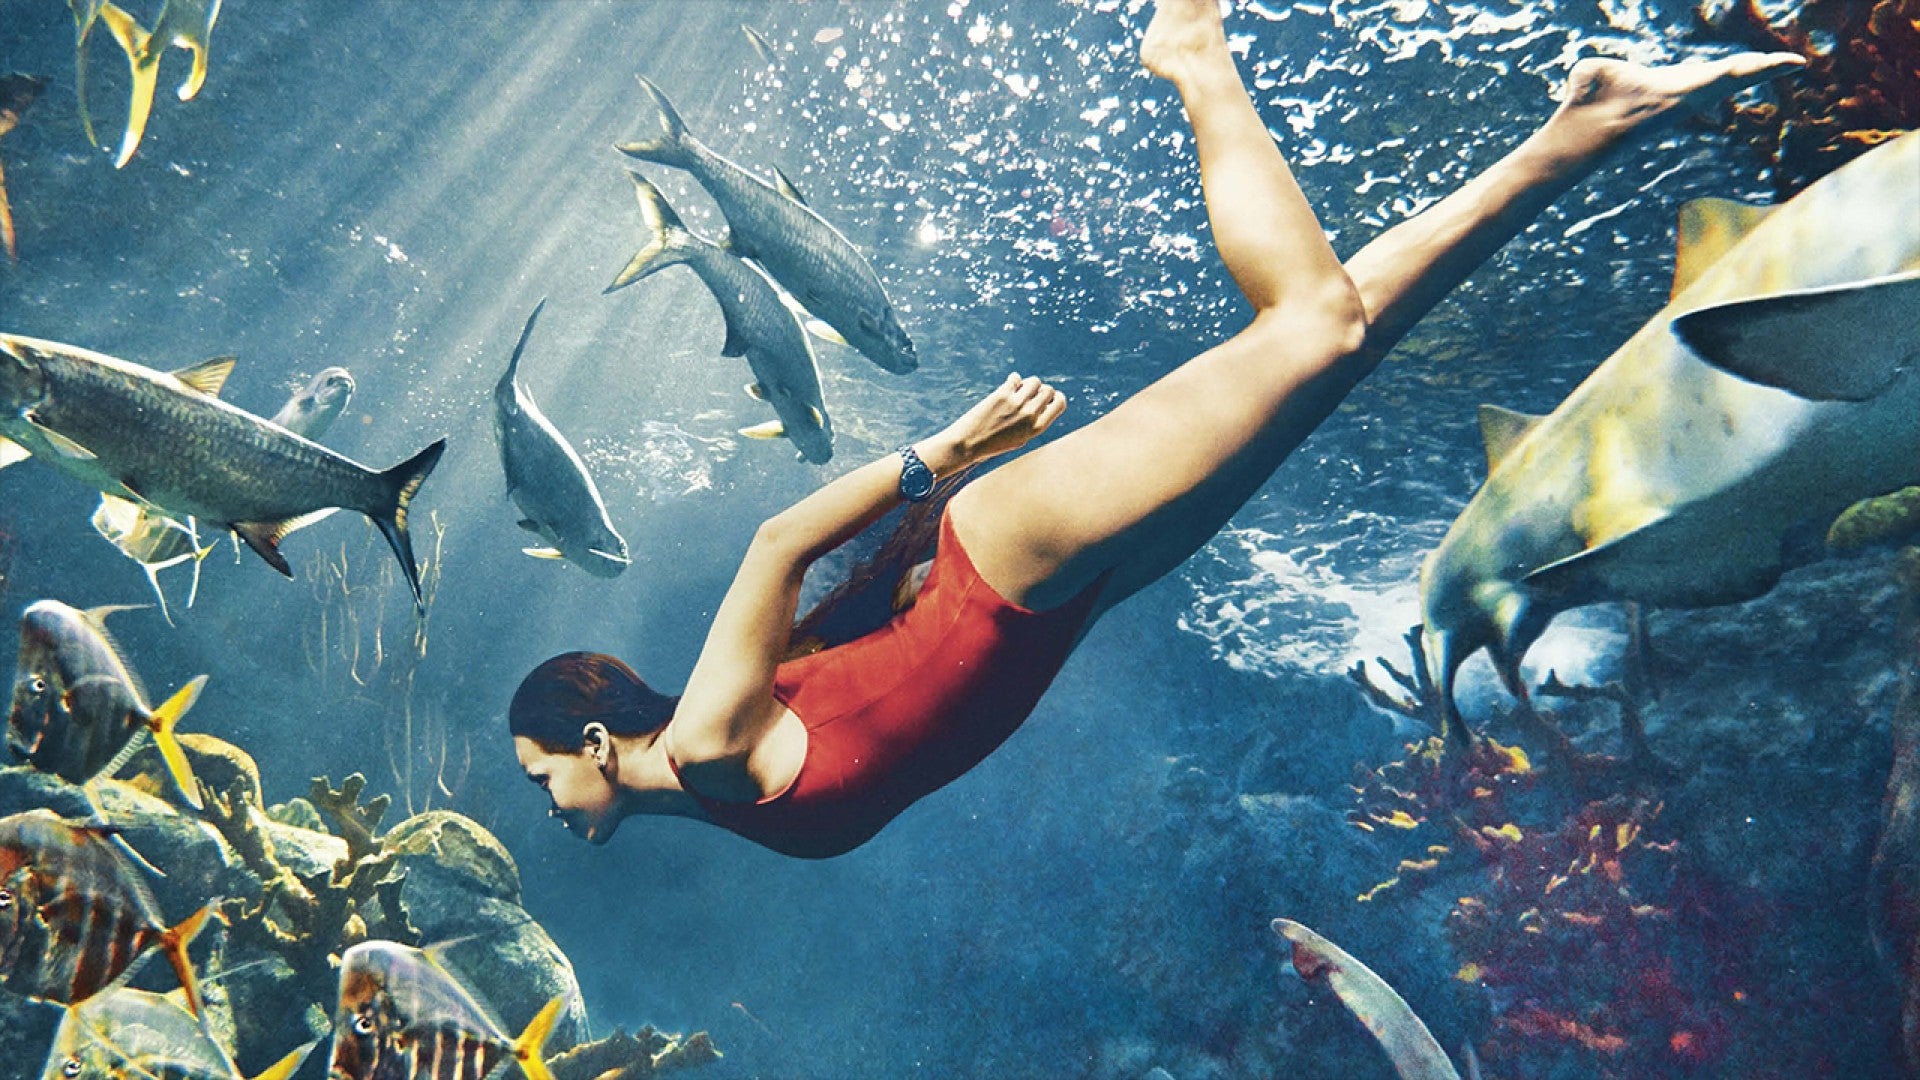 See Rihanna Swimming With Sharks in Behind-The-Scenes Video!